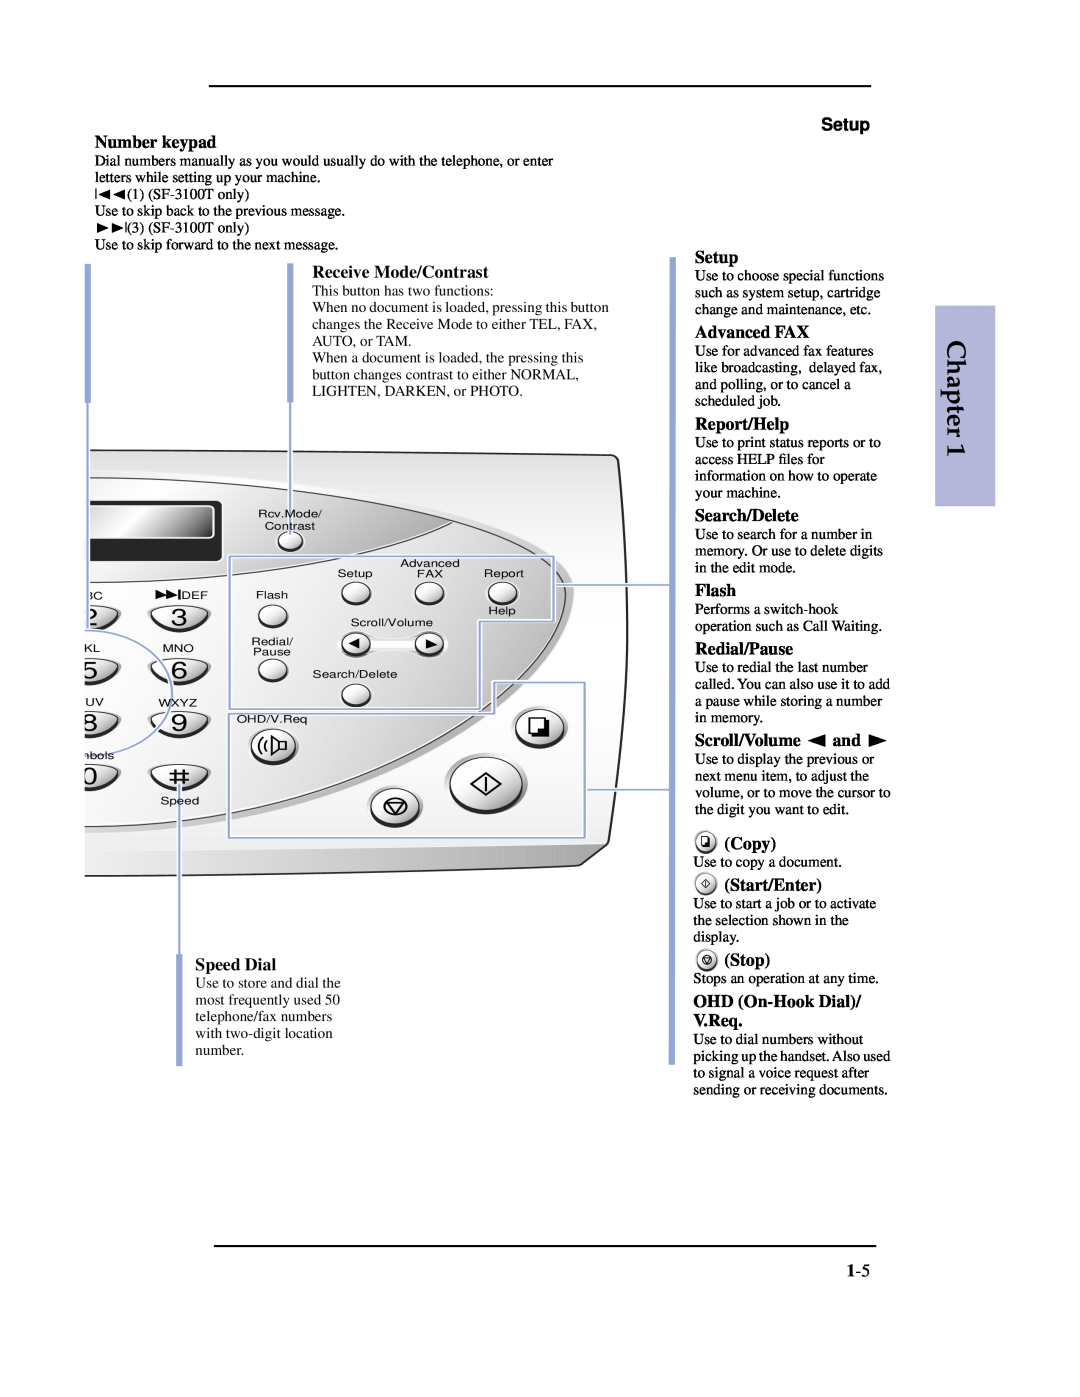 Samsung SF-3100 Number keypad, Receive Mode/Contrast, Speed Dial, Setup, Advanced FAX, Report/Help, Search/Delete, Flash 